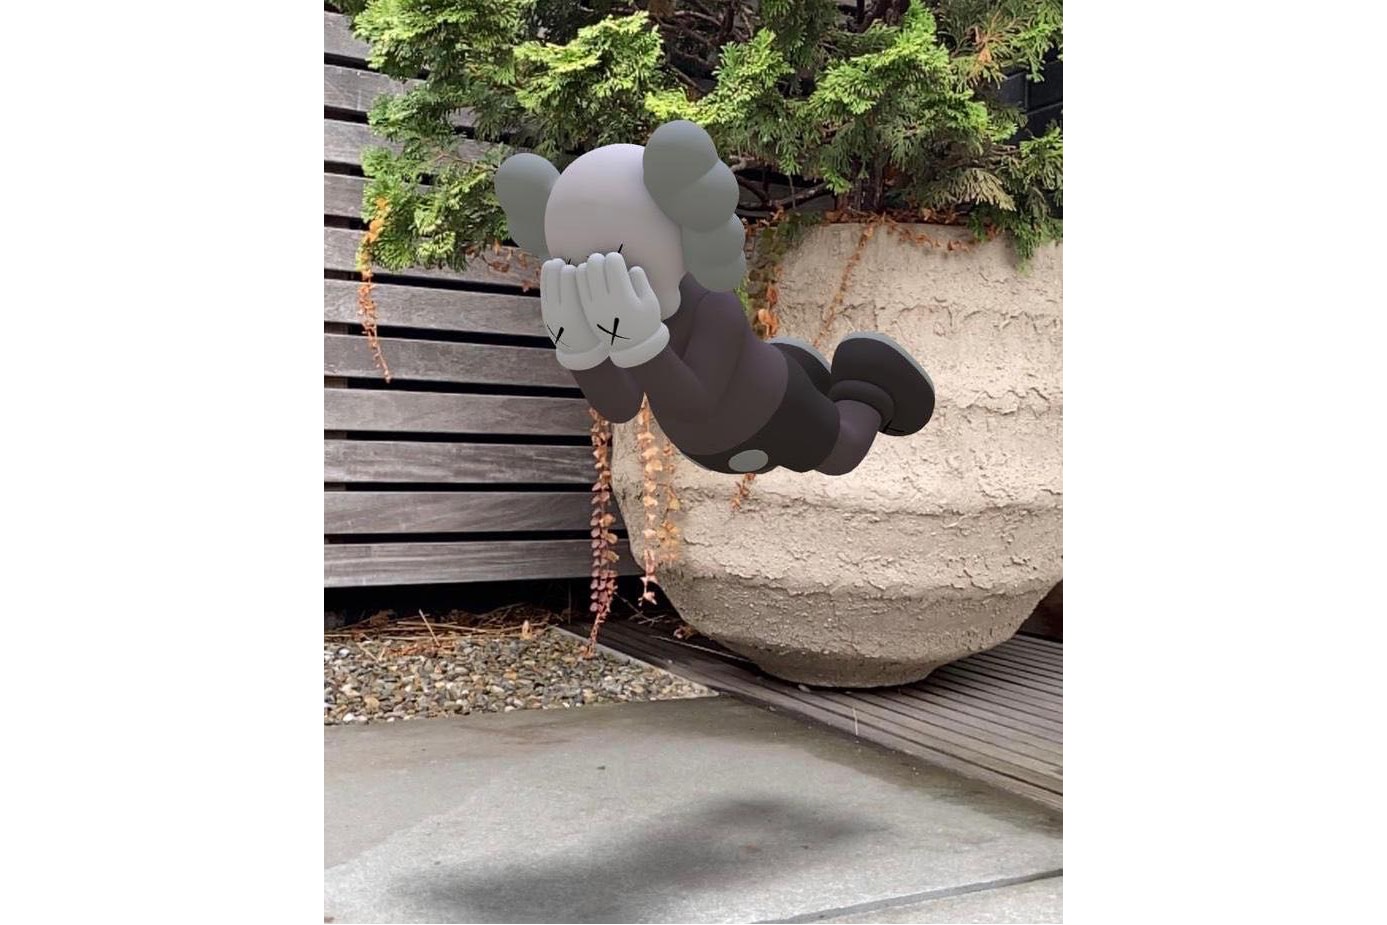 kaws acute art companion expanded holiday augmented reality sculpture edition